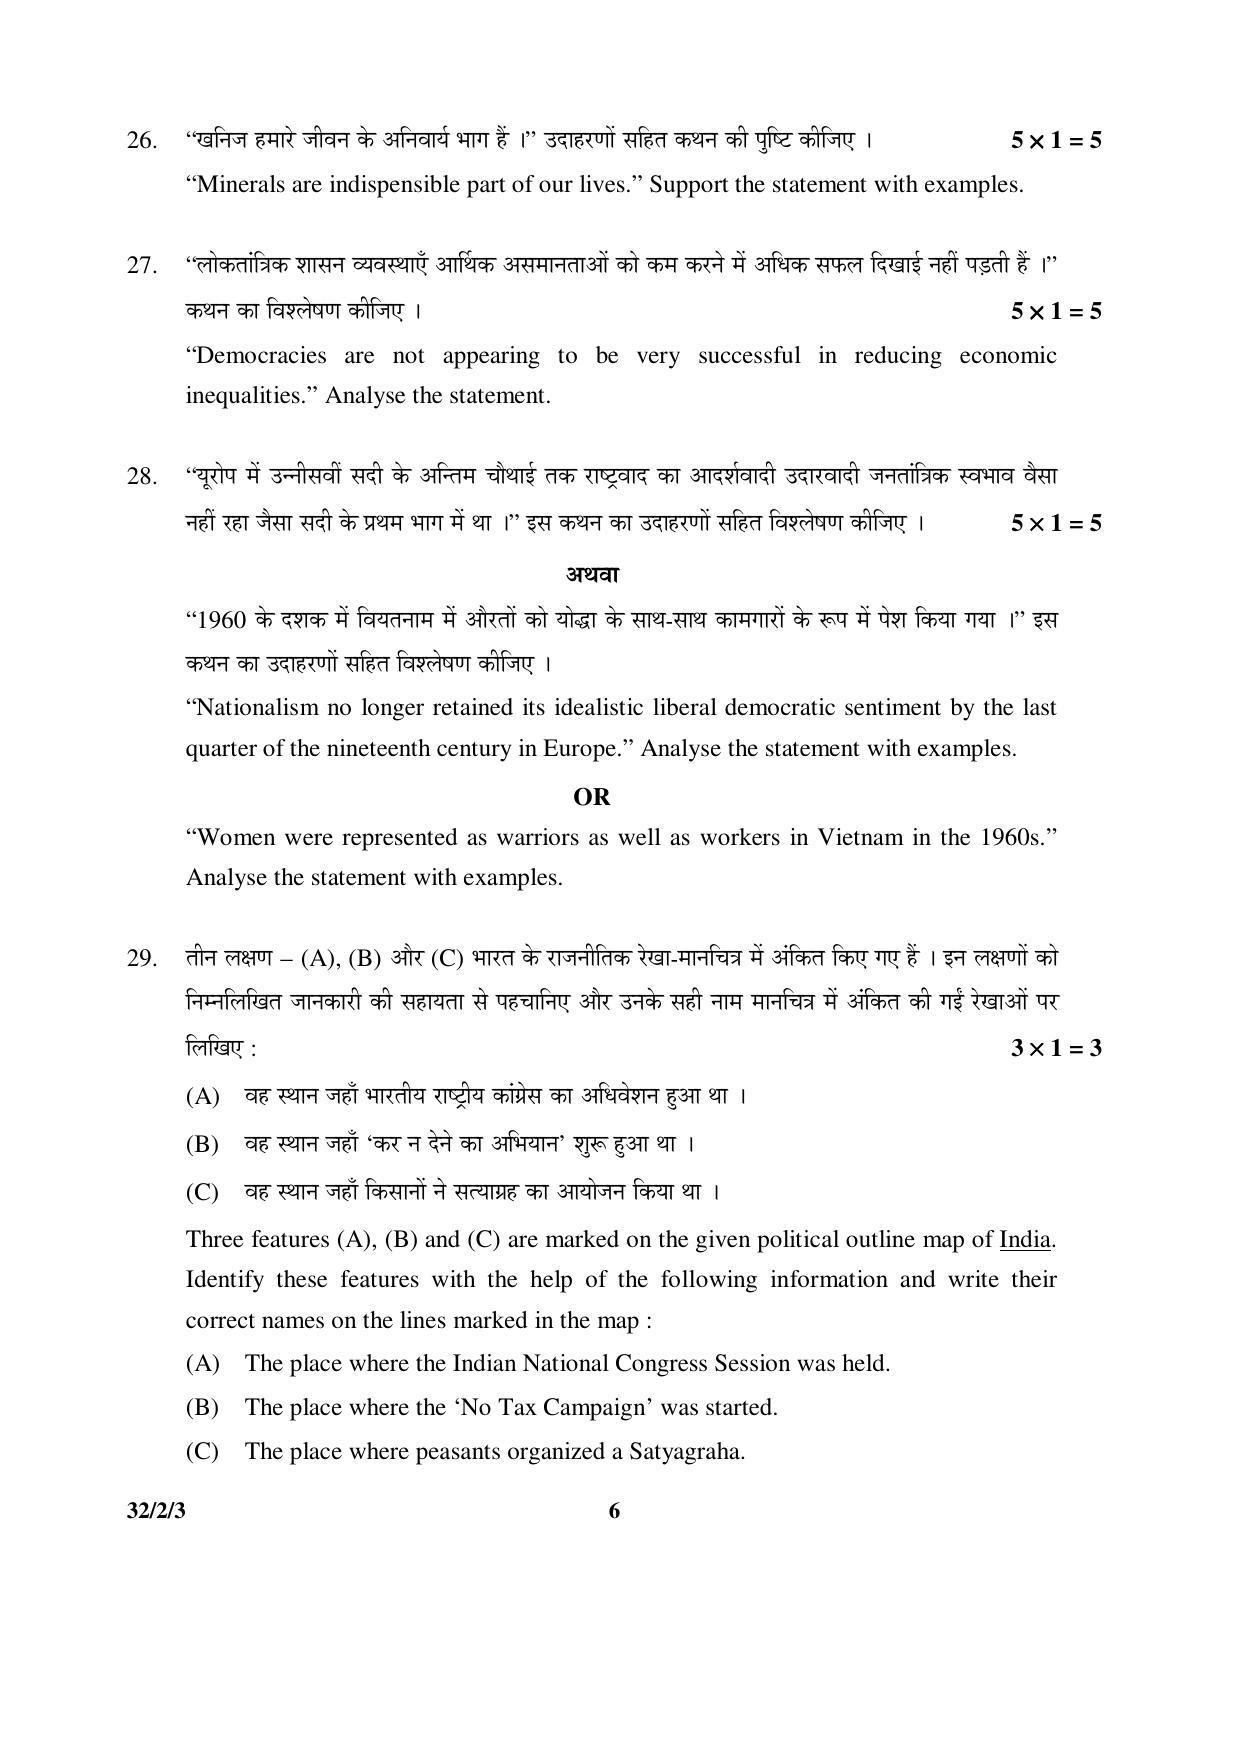 CBSE Class 10 32-2-3 _Social Science 2016 Question Paper - Page 6